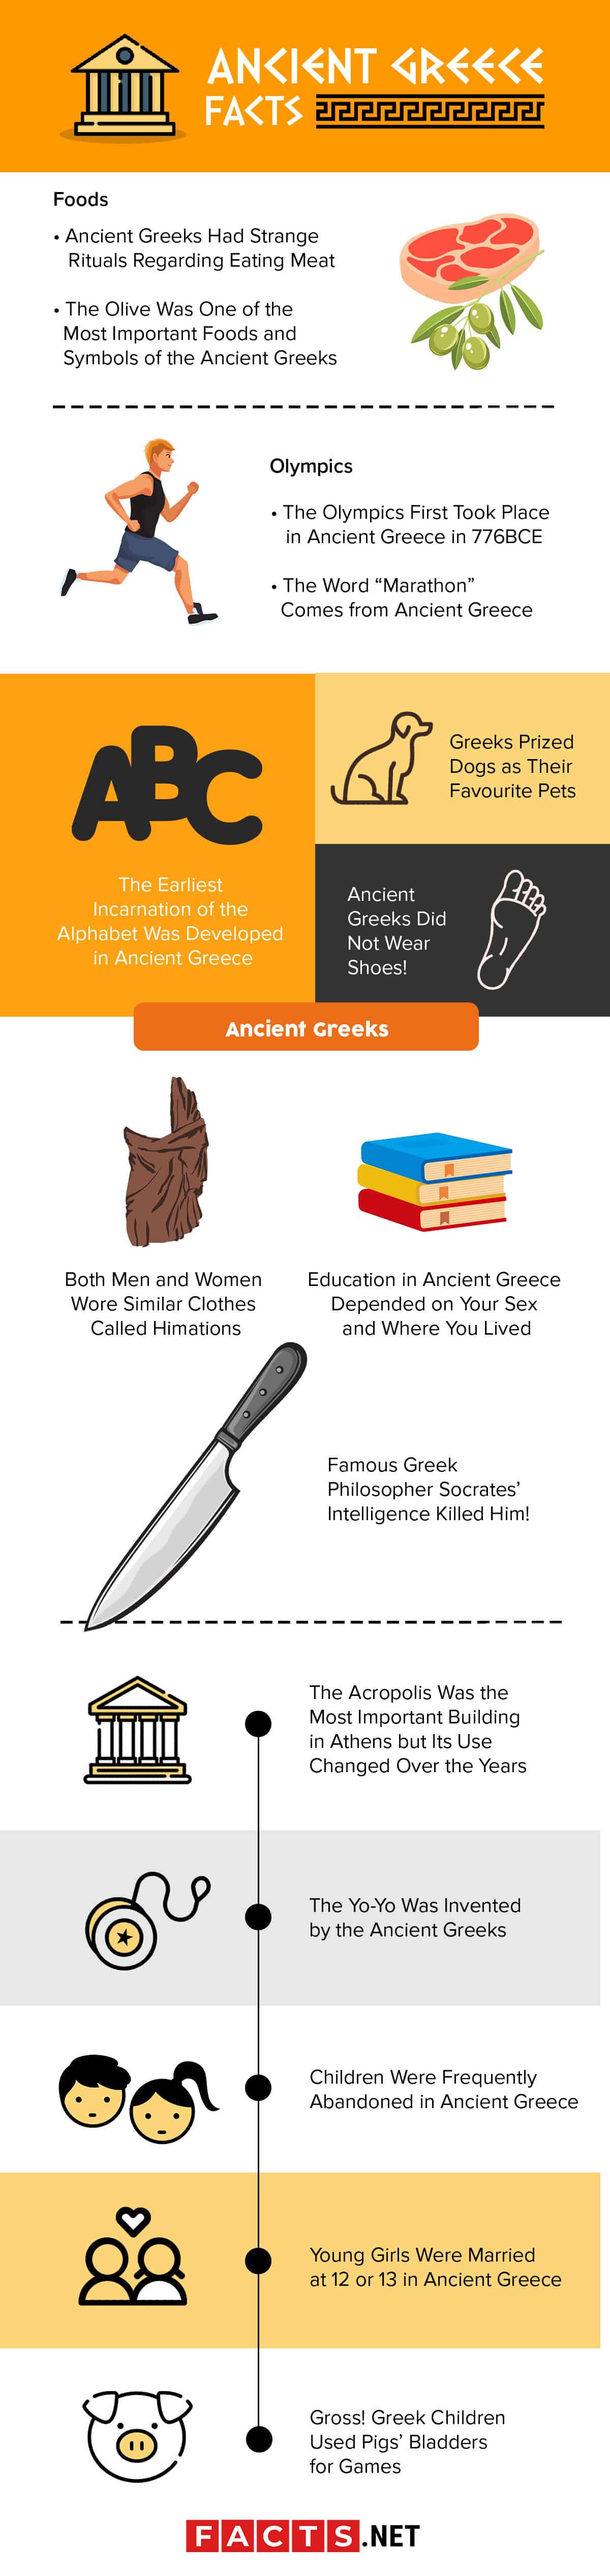 top-15-ancient-greece-facts-culture-history-art-and-more-facts